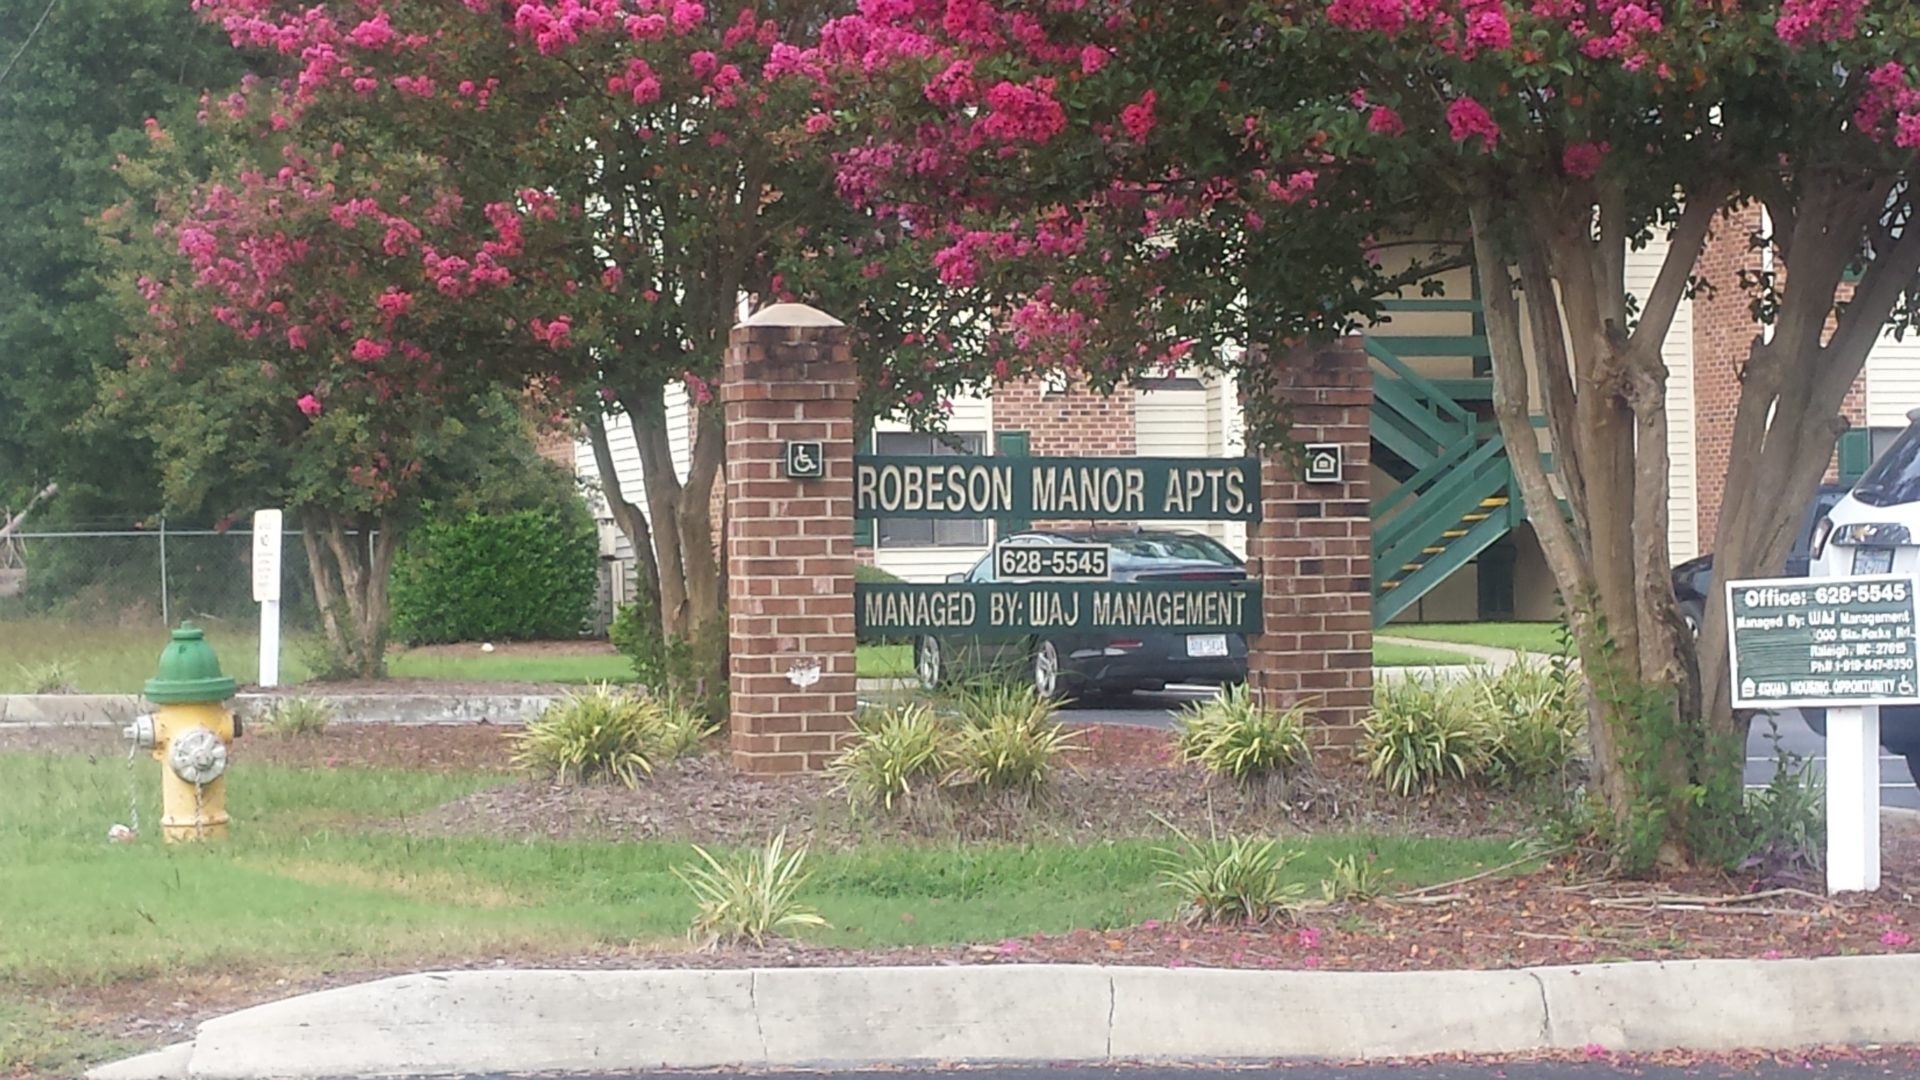 ROBESON MANOR APARTMENTS